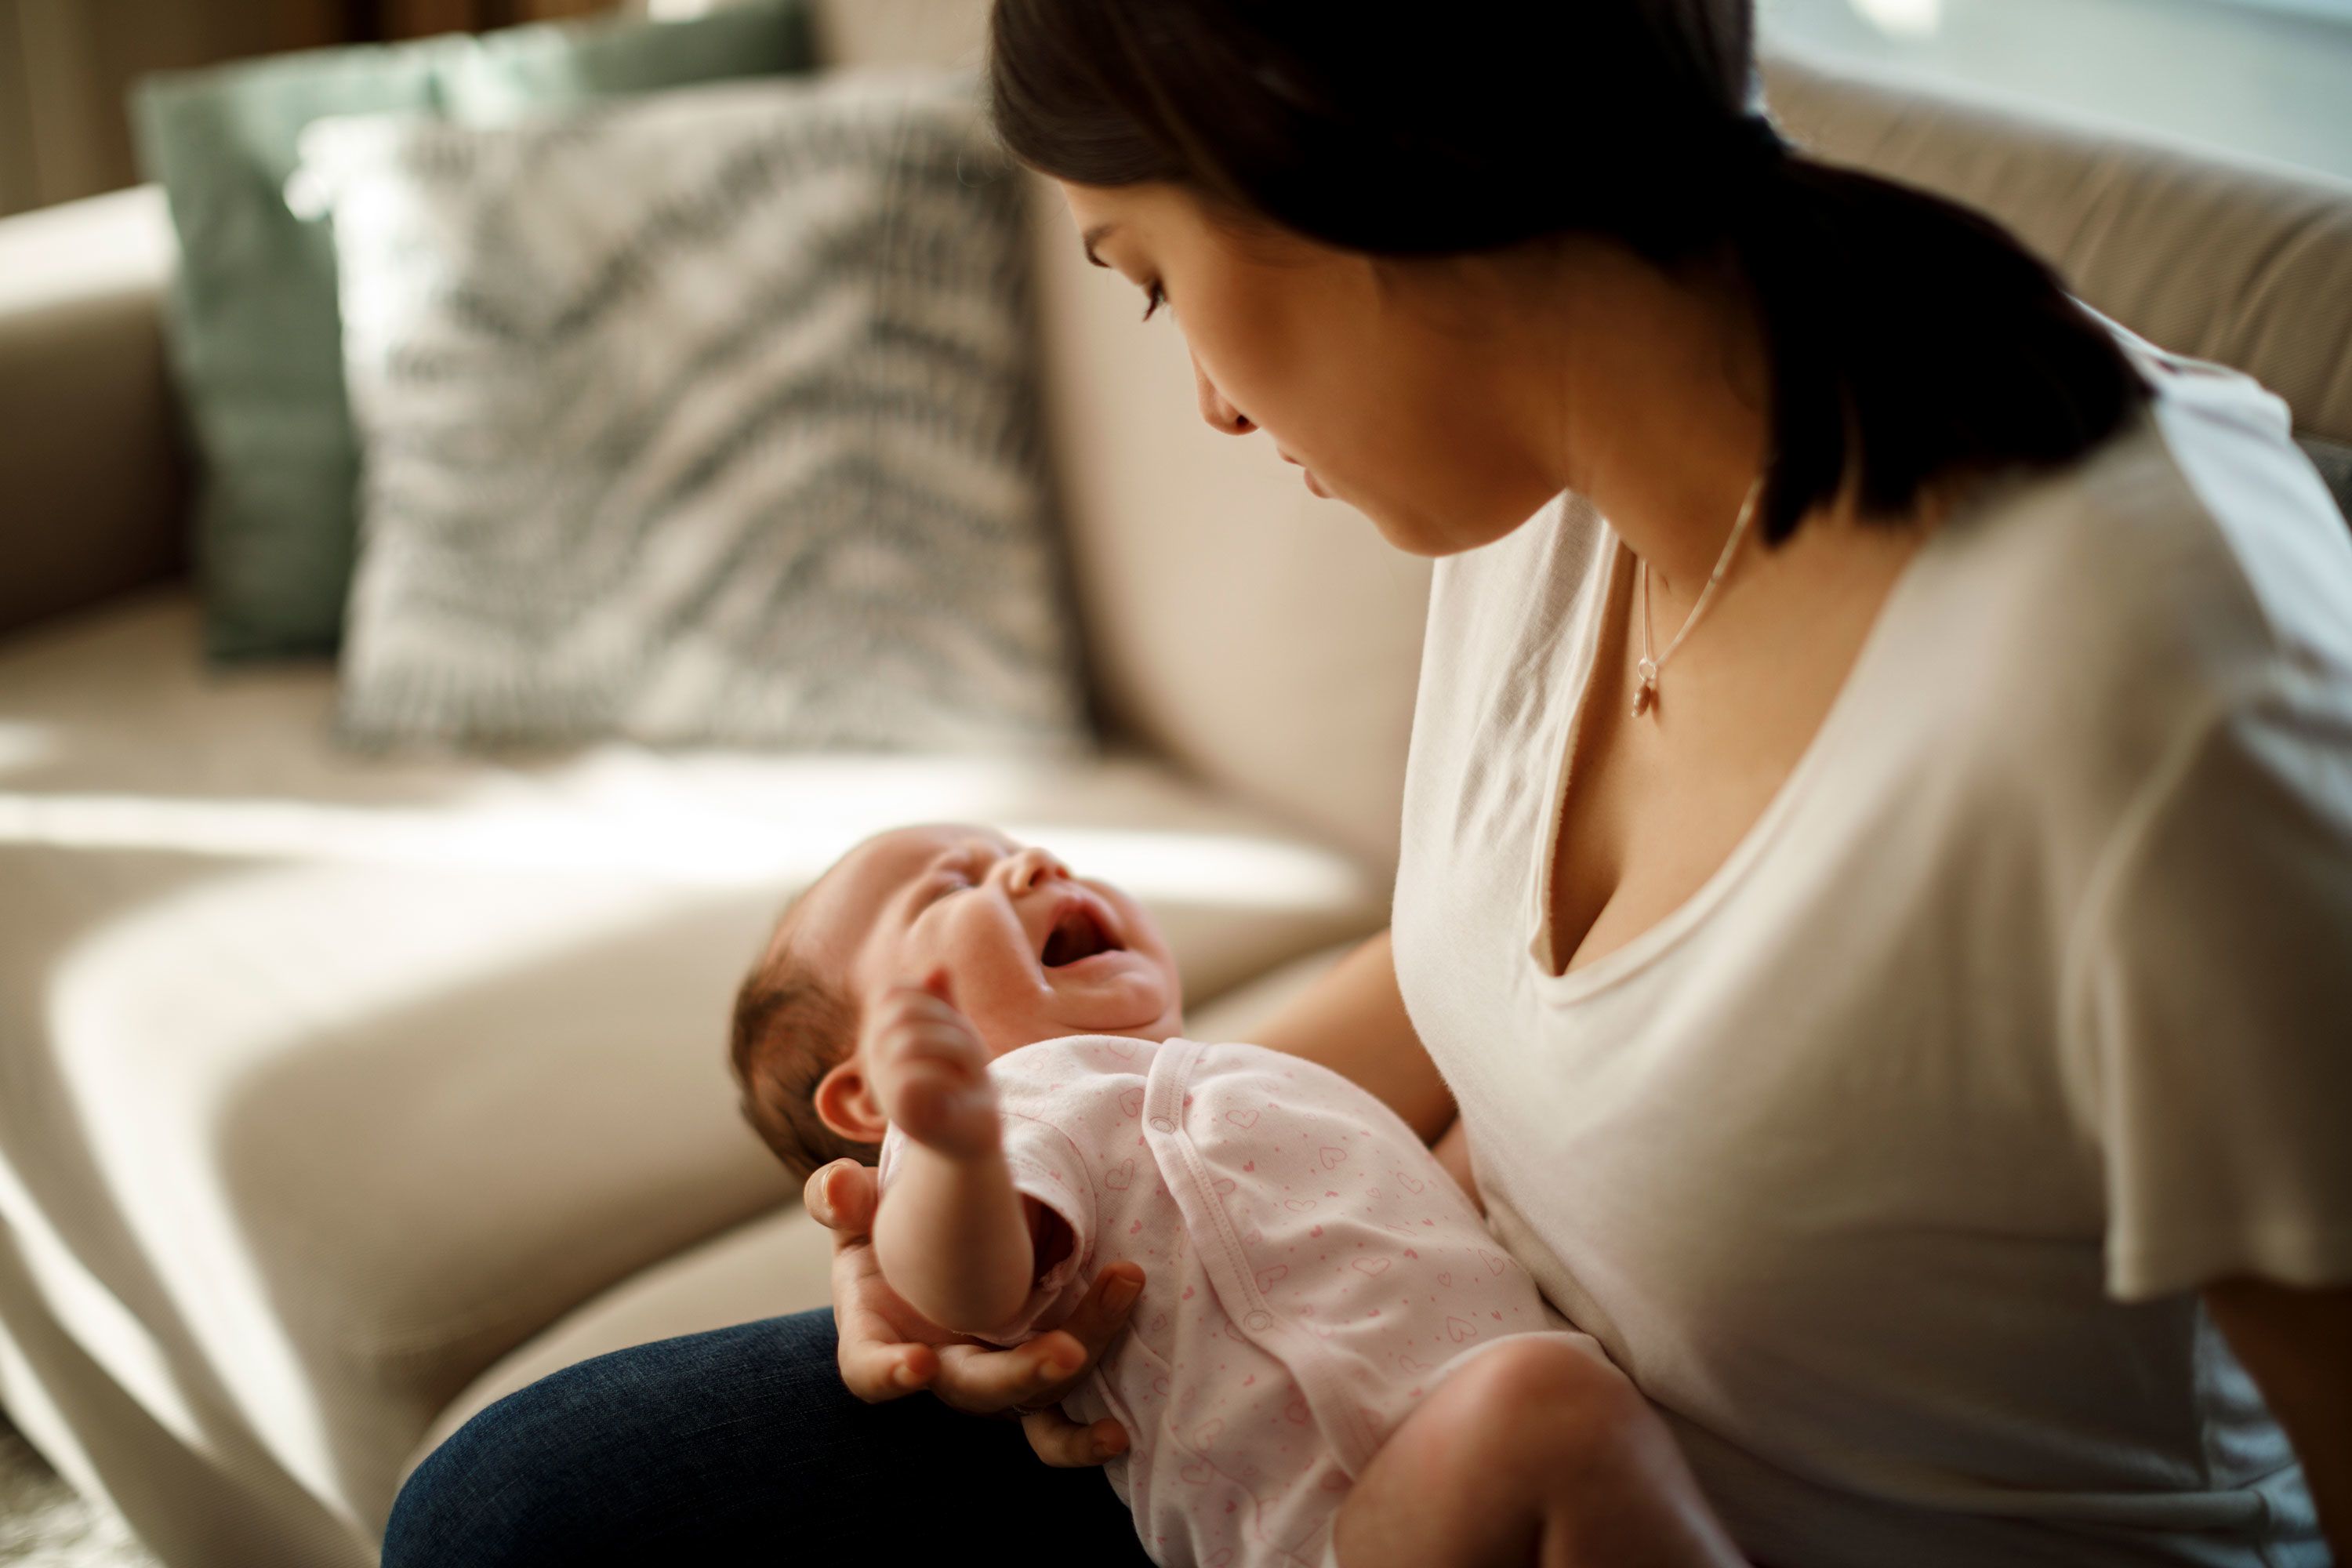 Women Say There Are Too Many Barriers To Accessing Postpartum